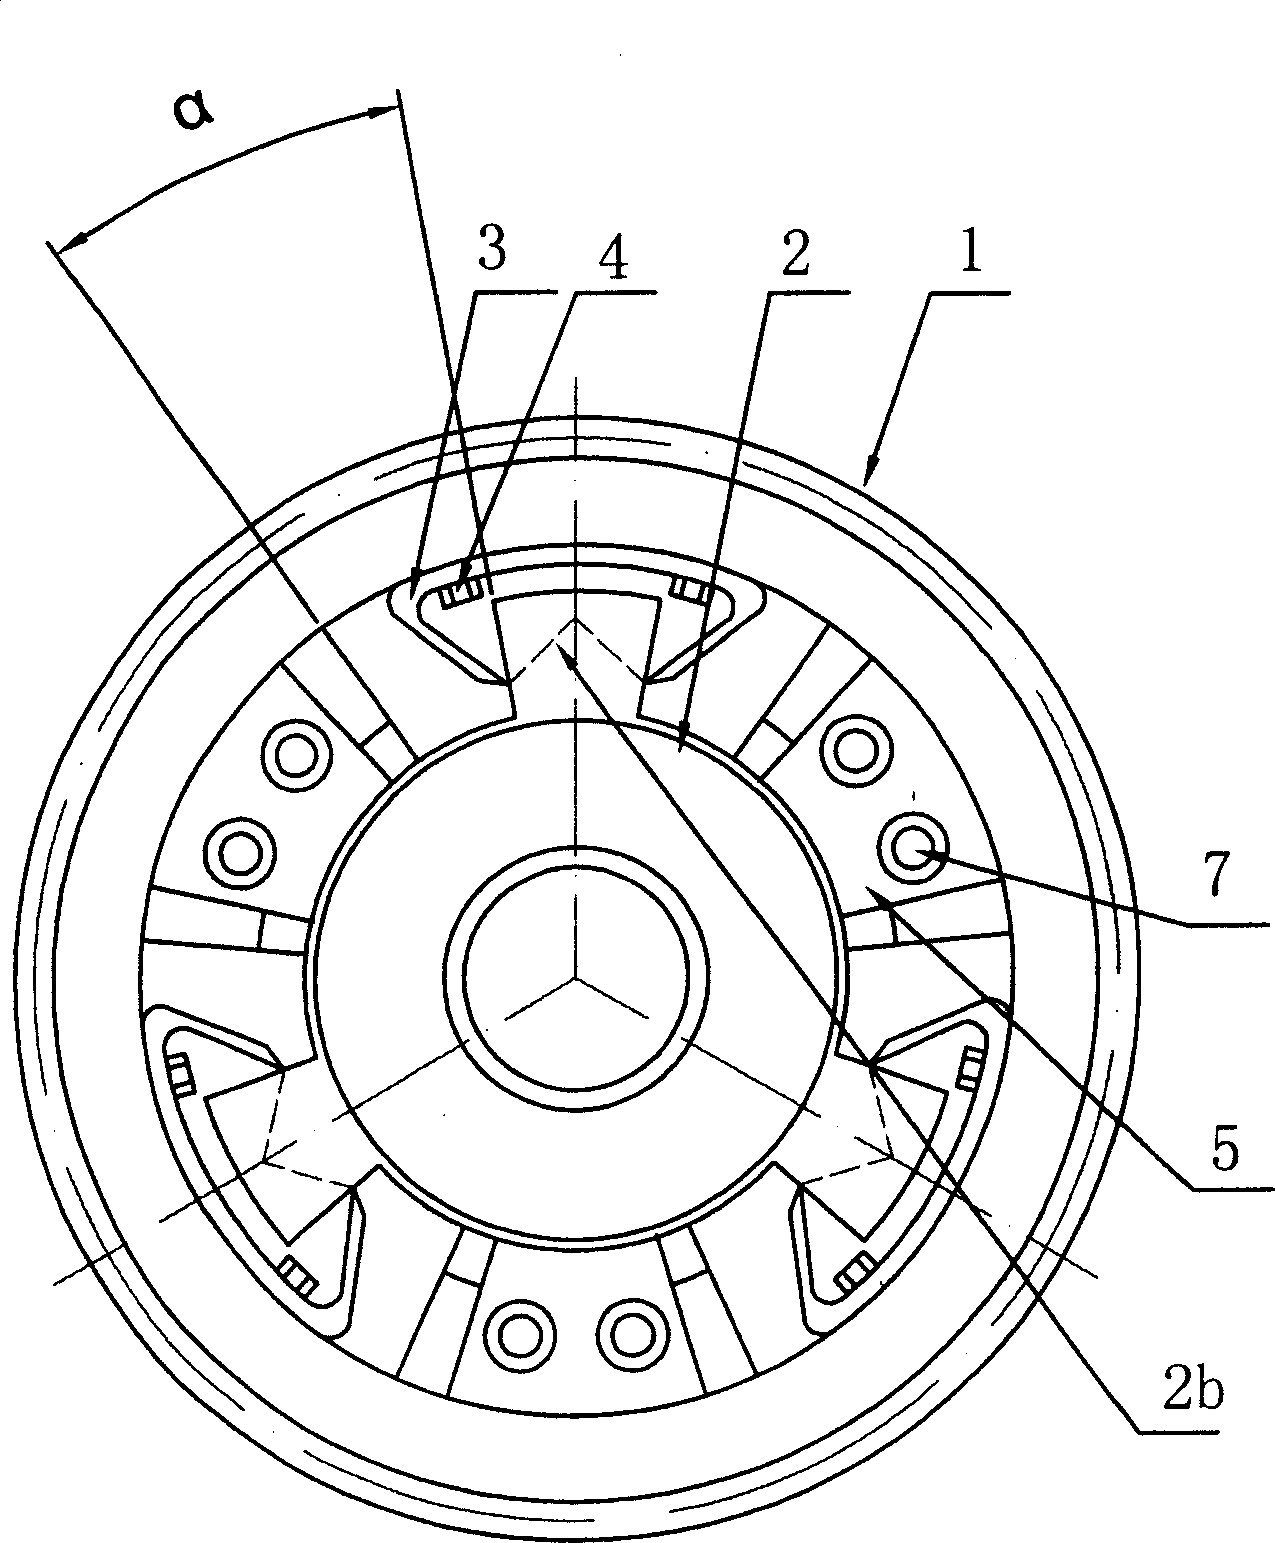 Non-impact speed changing transmission gear